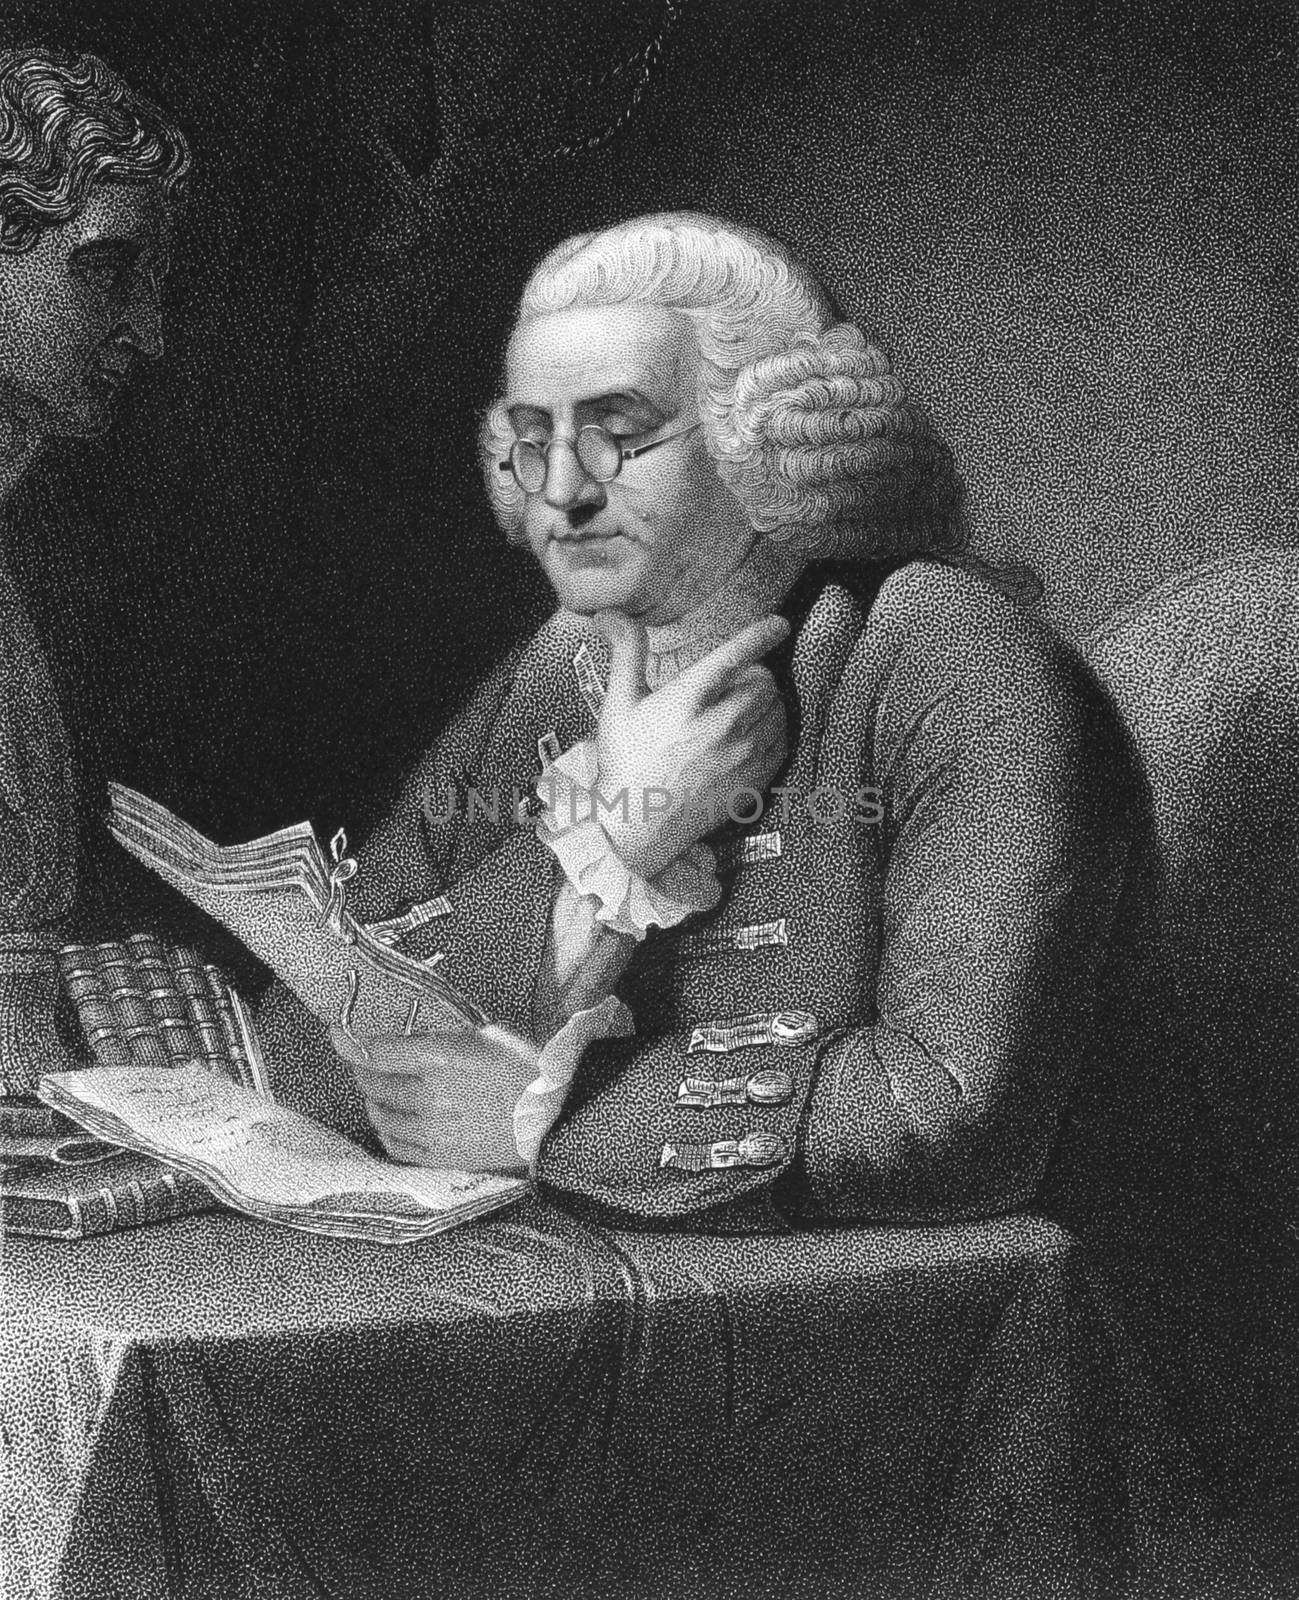 Benjamin Franklin (1706-1790) on engraving from 1835. One of the Founding Fathers of the United States. Engraved by T.B.Welch and published in ''National Portrait Gallery of Distinguished Americans Volume II'',USA,1835.